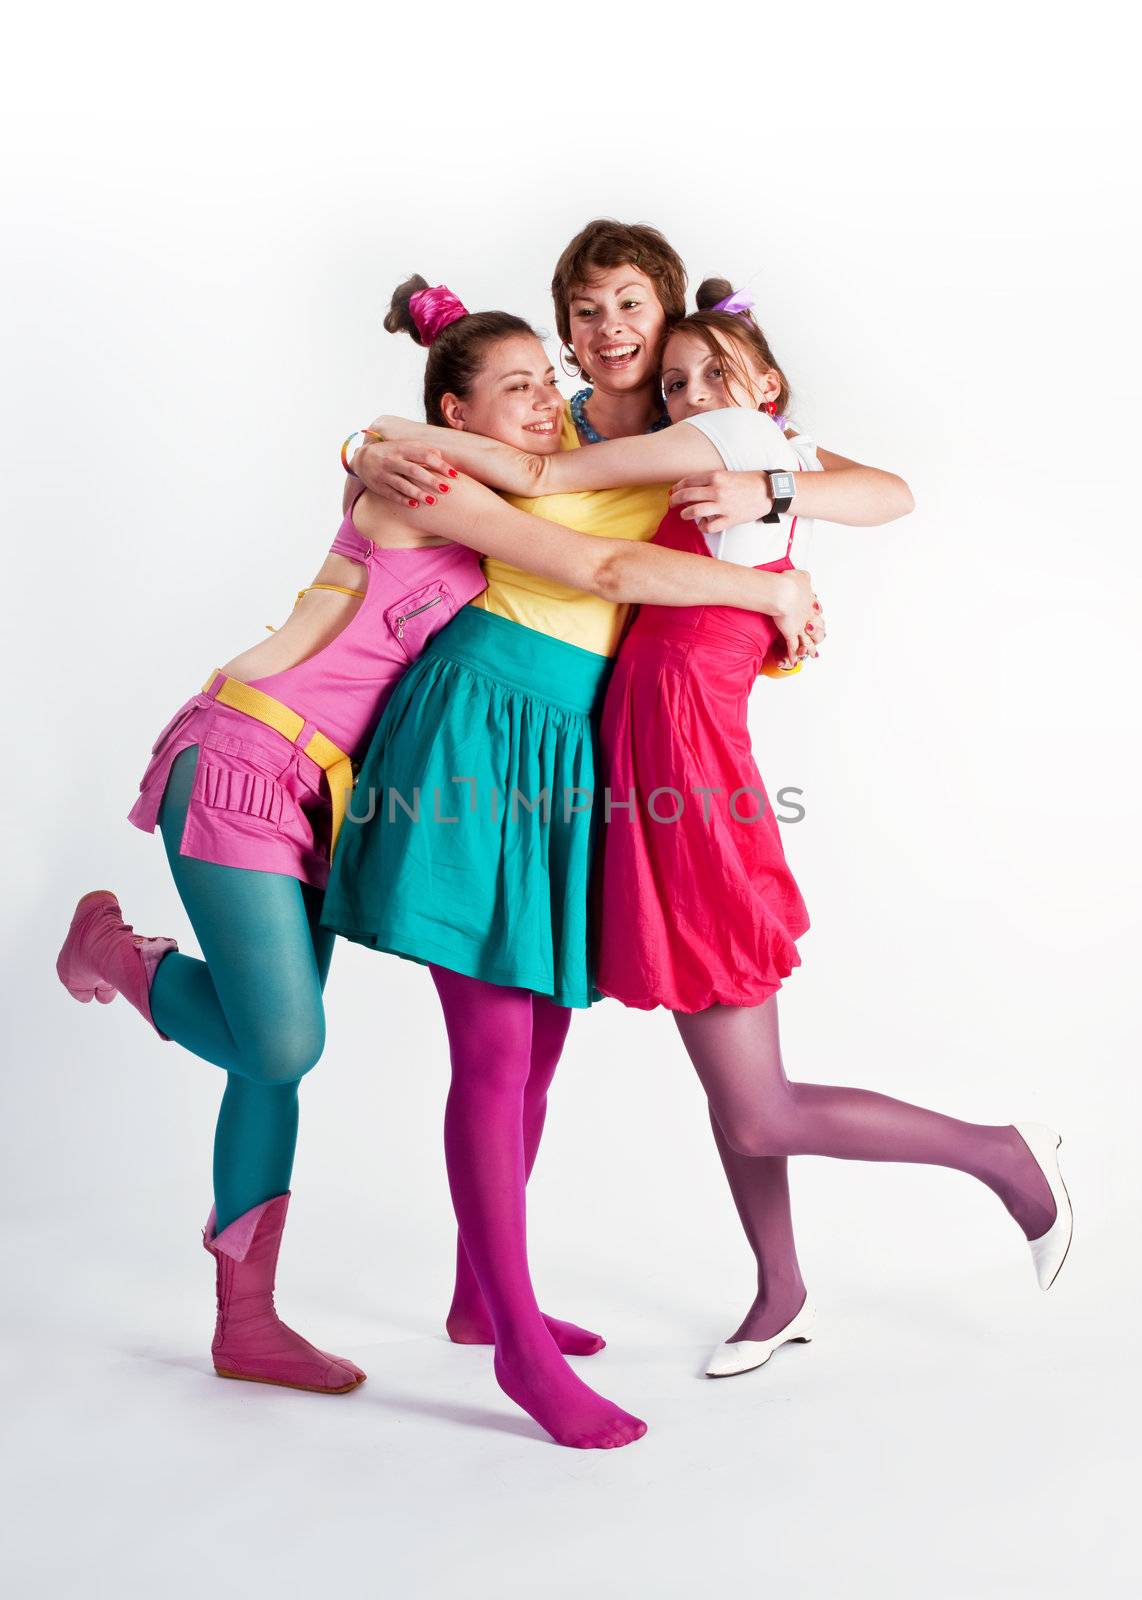 people series: three young girls in bright clothes